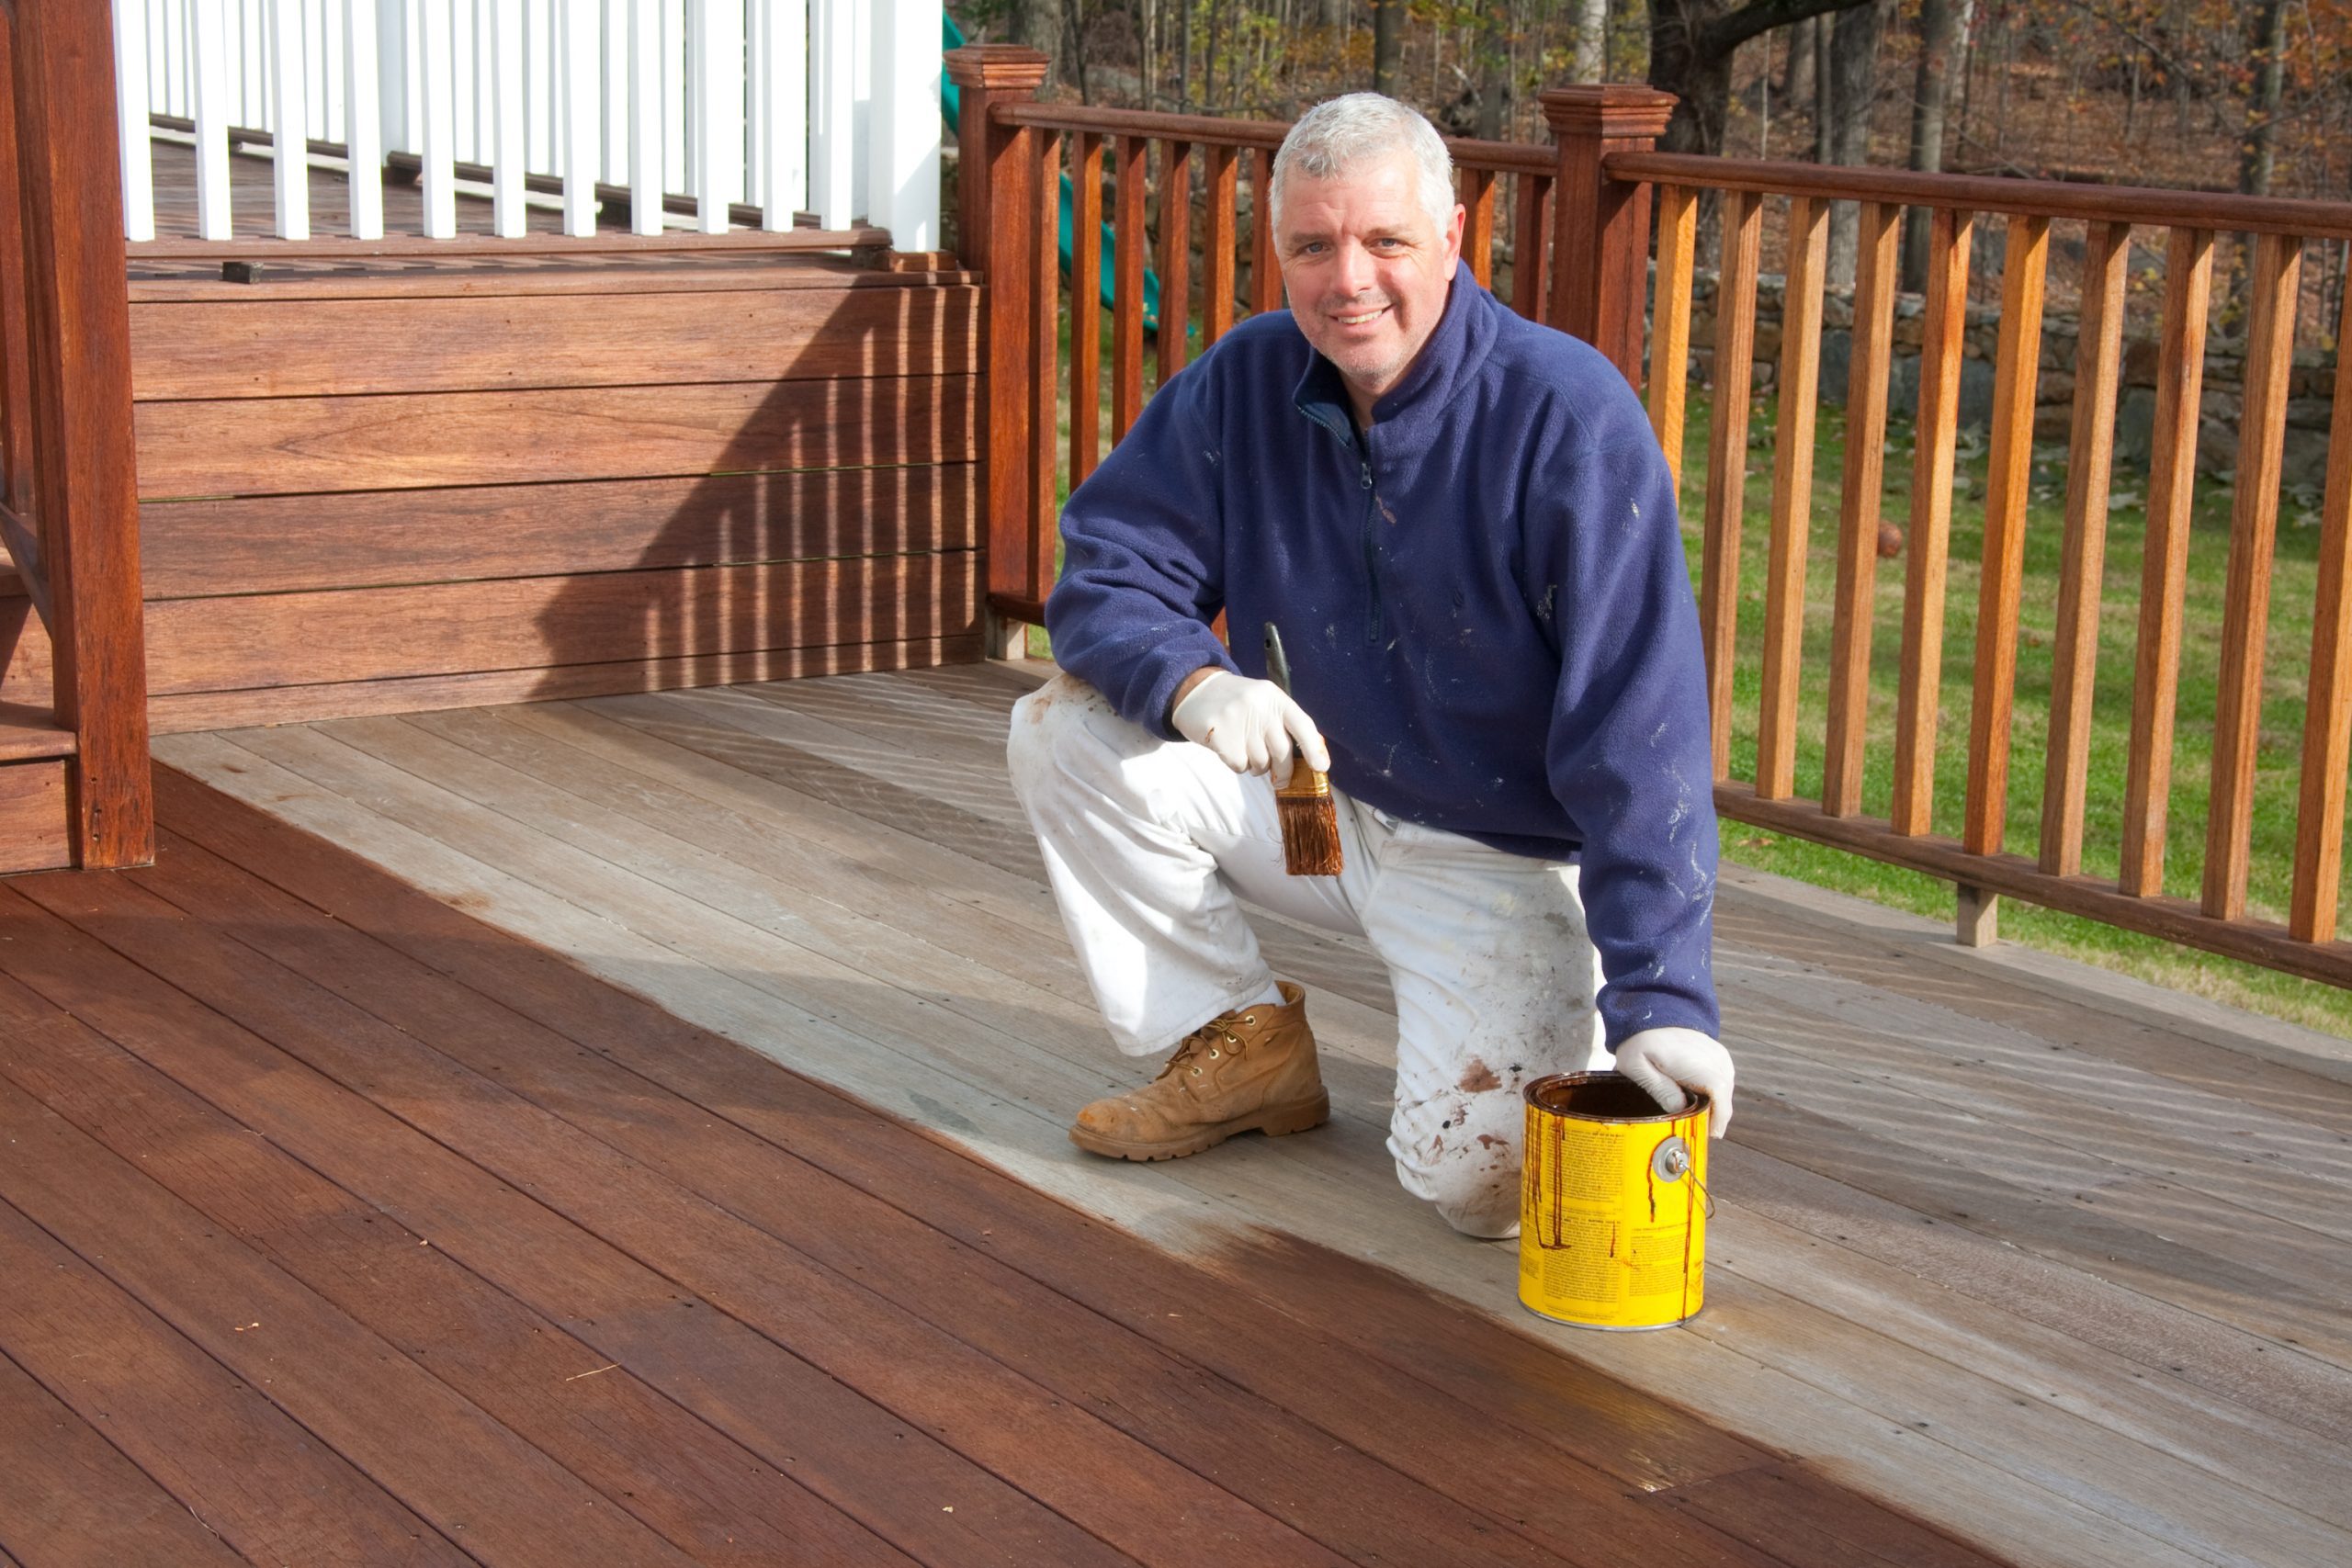 Deck Staining Companies Near Me